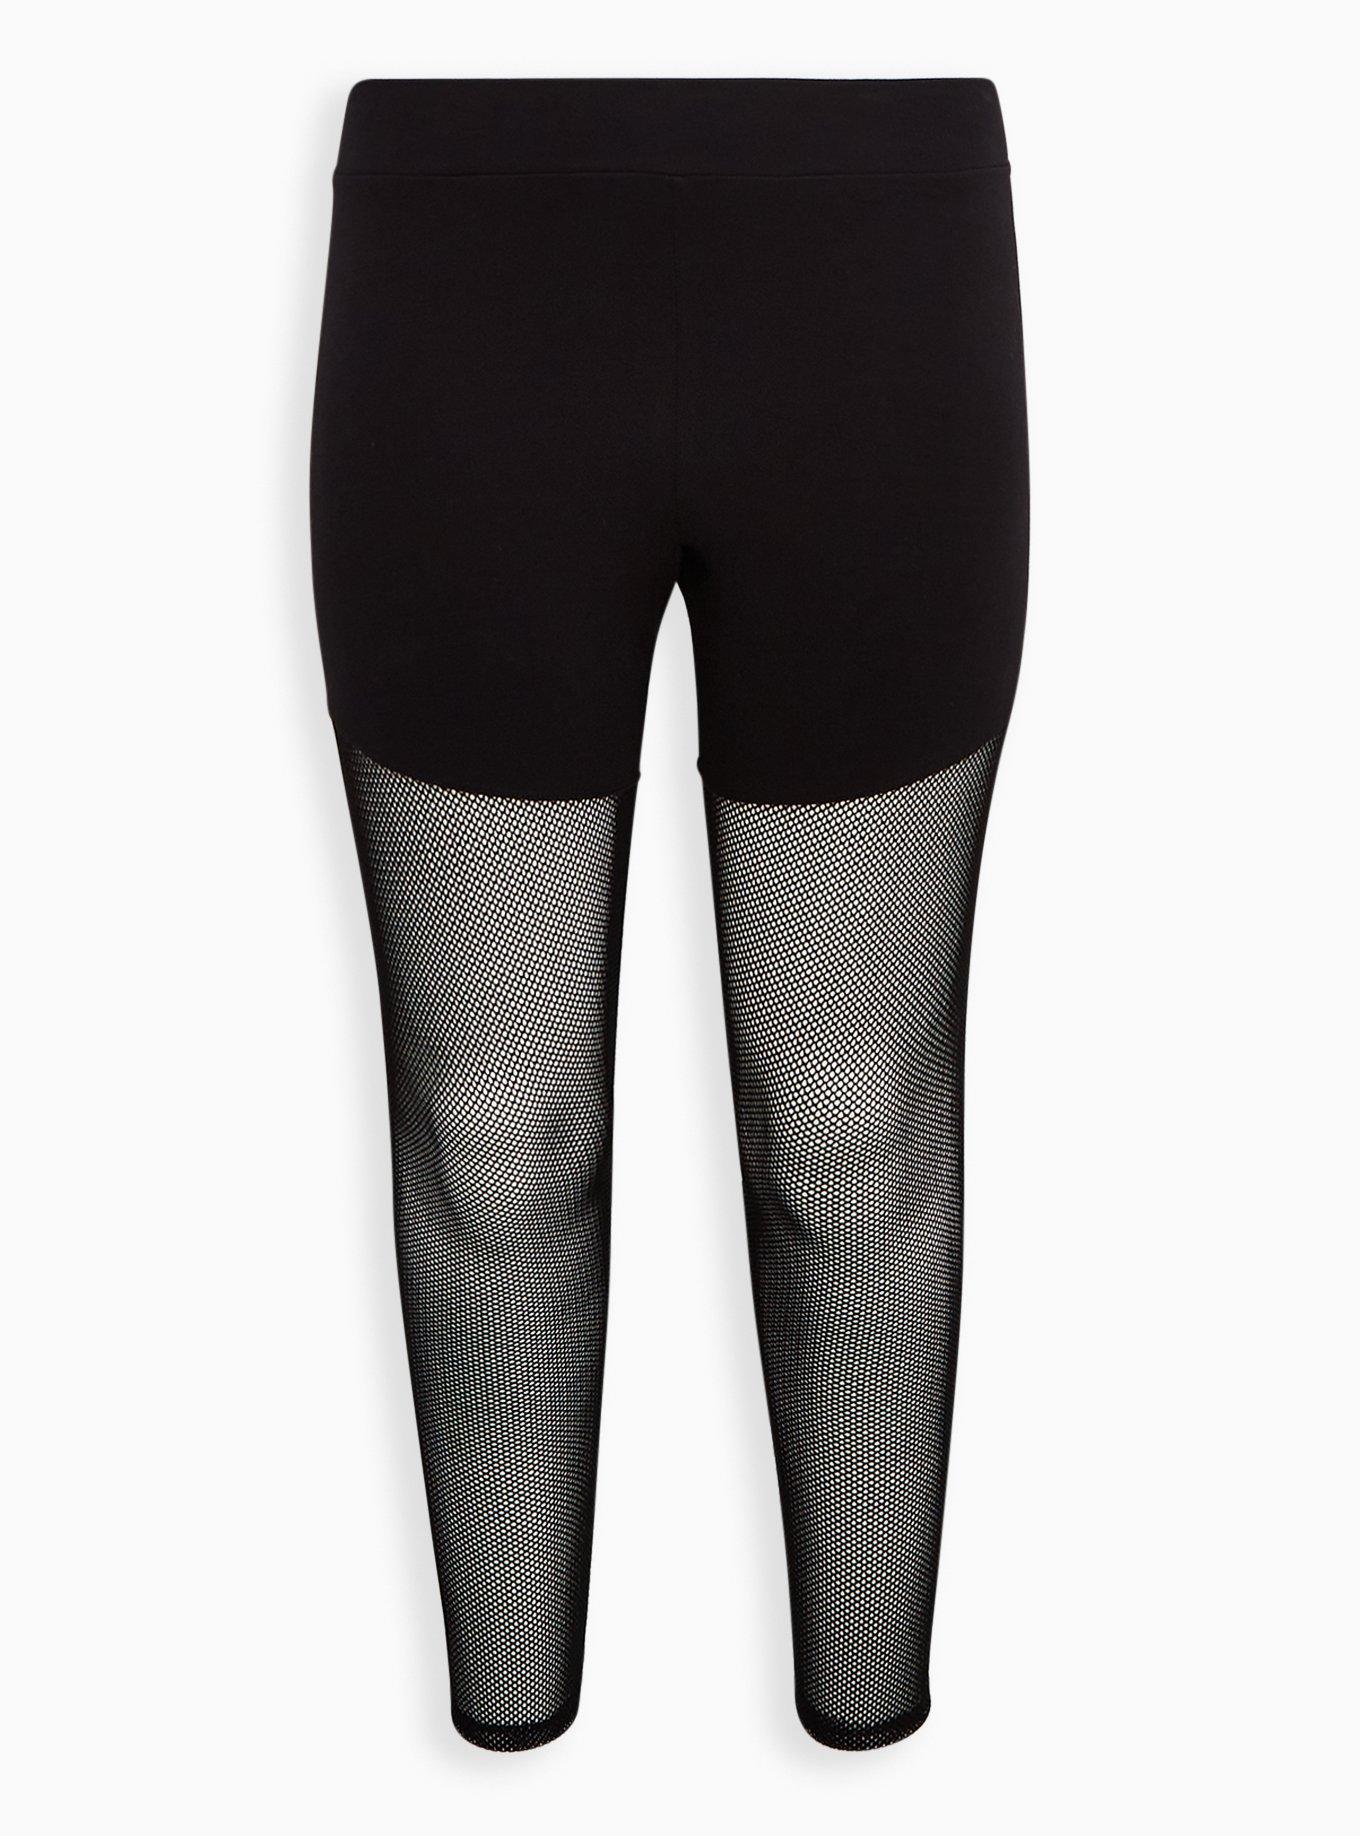 A fav!!! Sierra Legging try on! These will be $17 off + 5% off